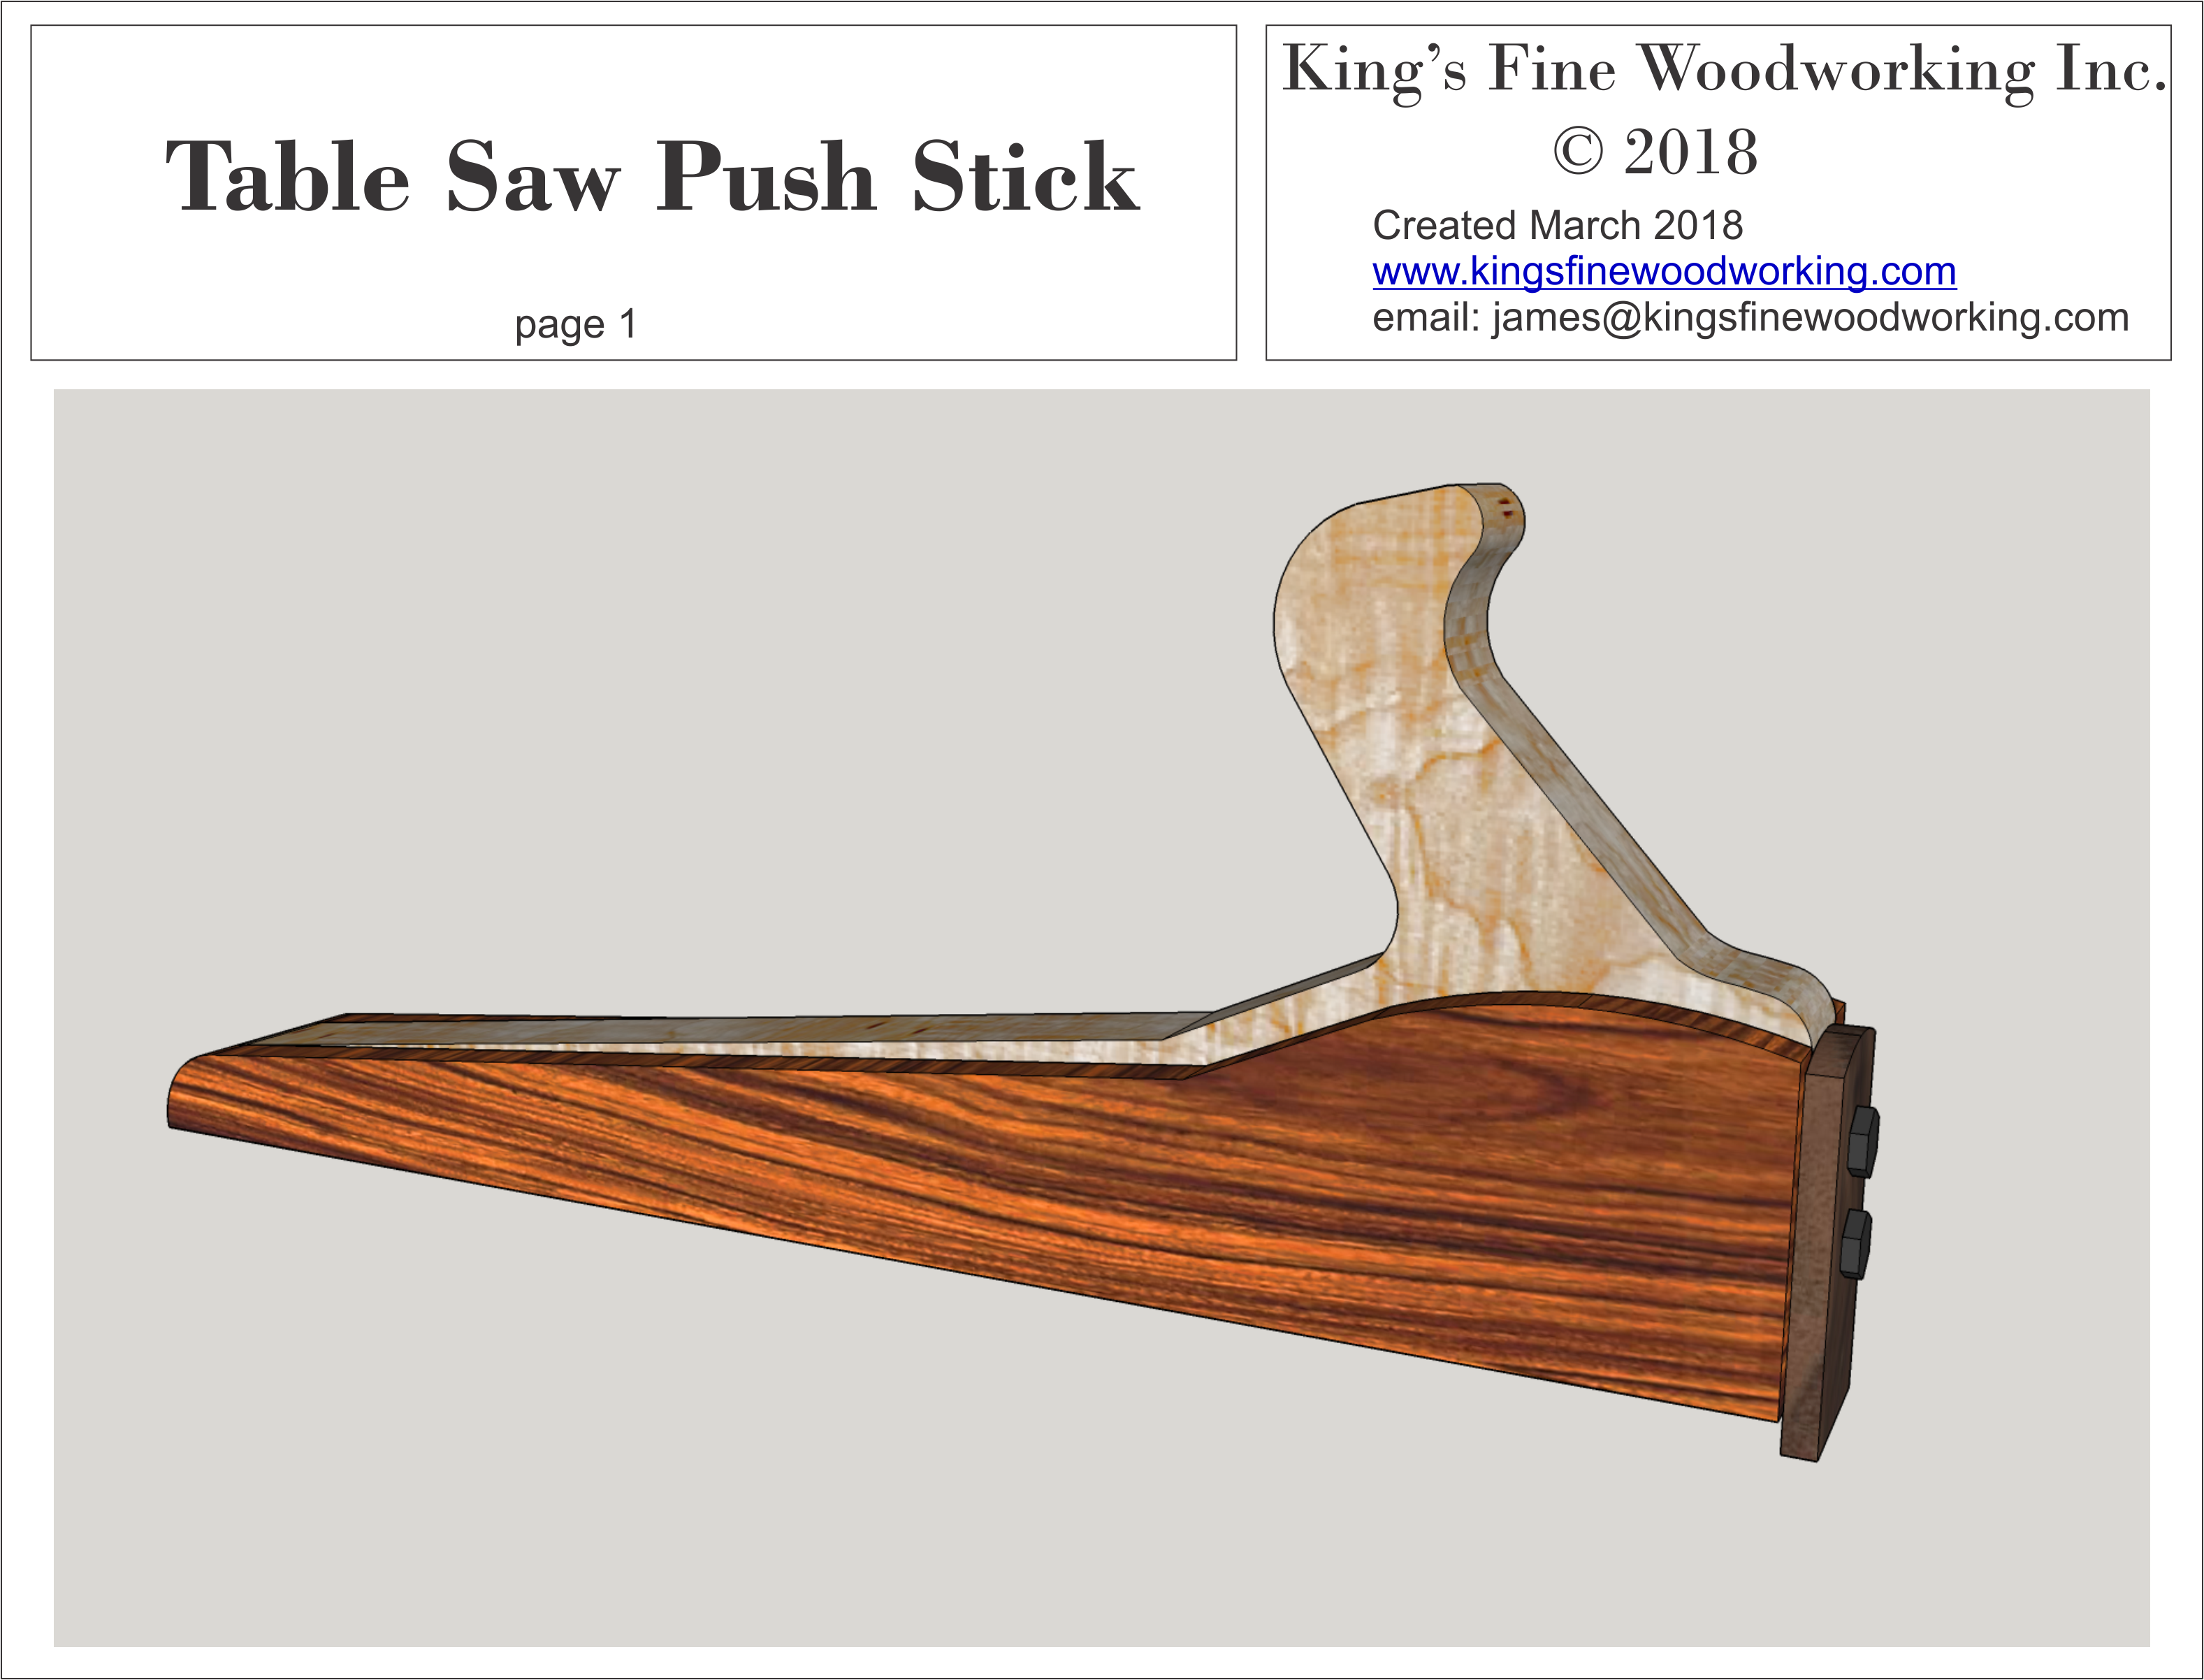 How to Make a Push Stick - FineWoodworking